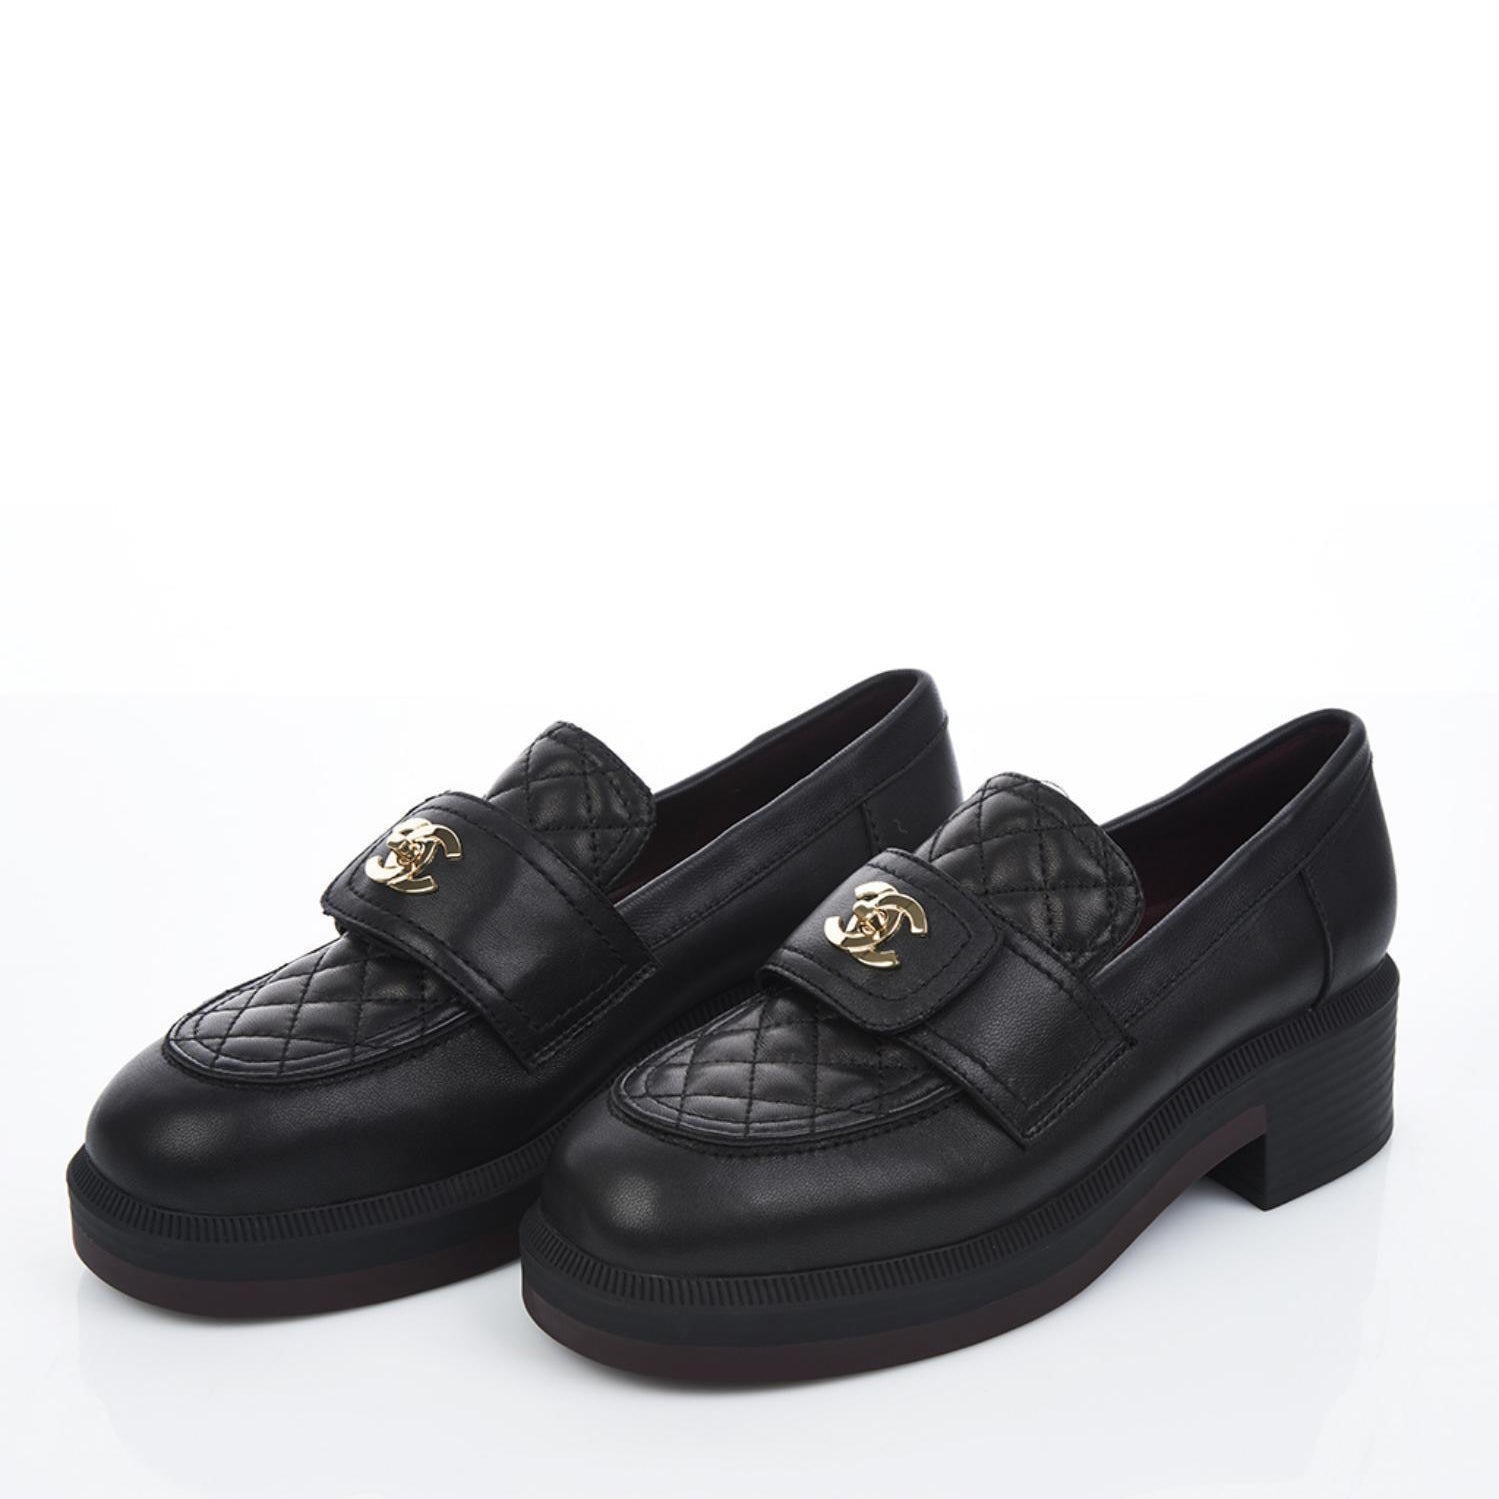 Louis Vuitton Pre-owned Women's Leather Loafers - Black - EU 35